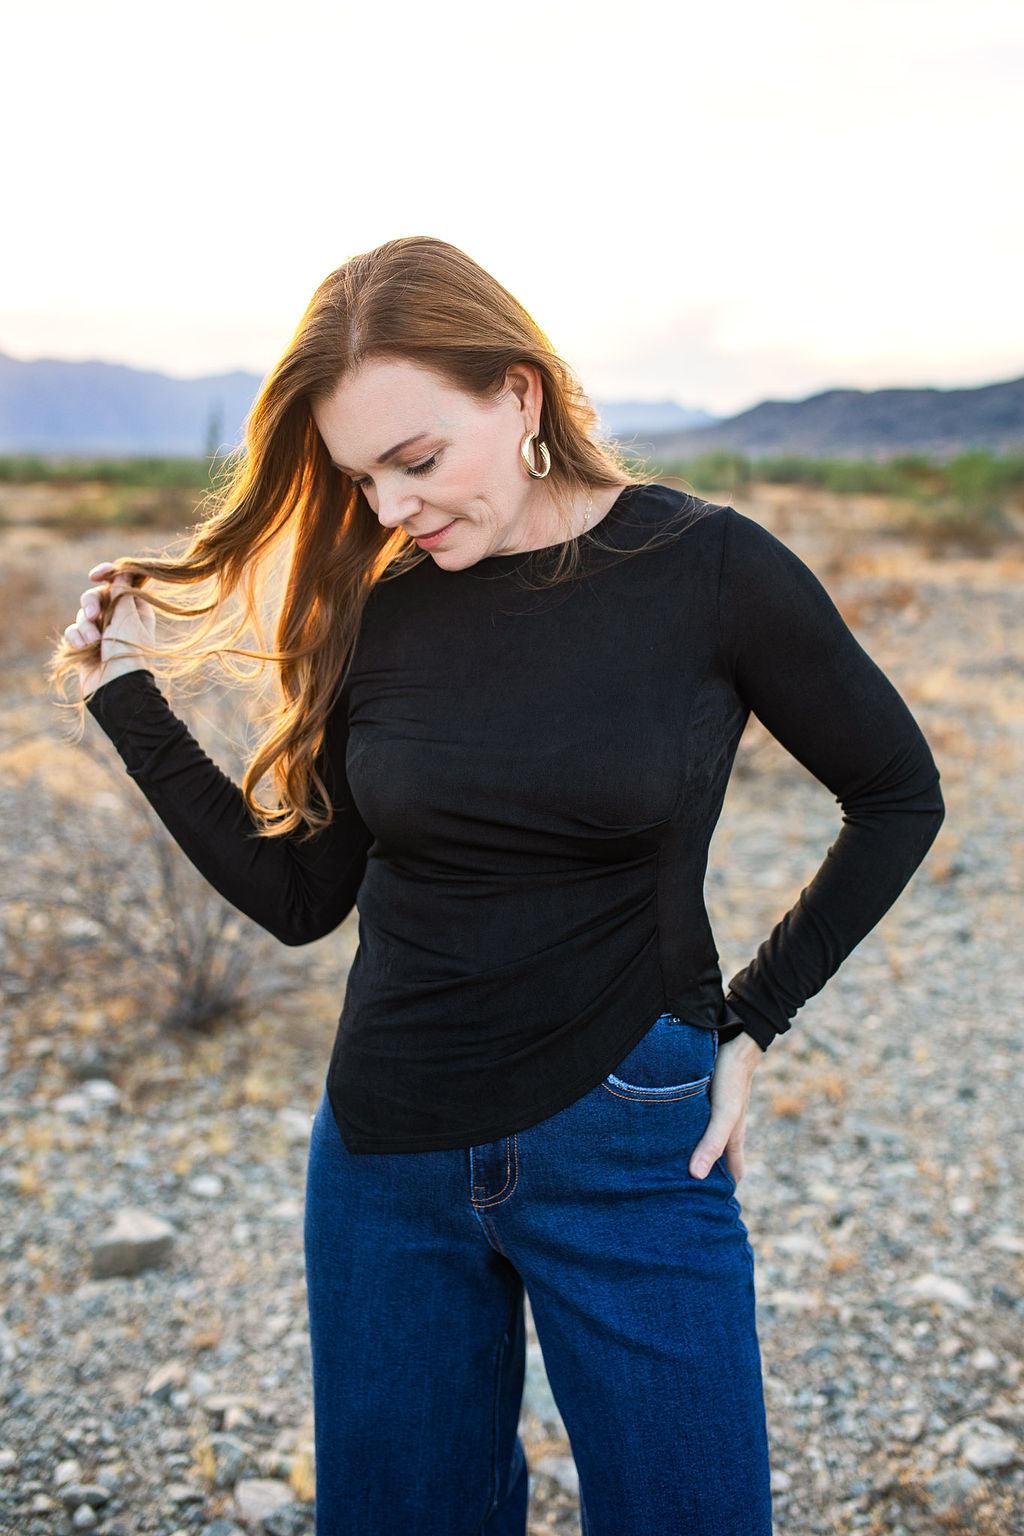 Slinky Side Pleated Long Sleeve Black Top-110 Long Sleeve Tops-Long Sleeve Black Top, Max Retail, Slinky Side Pleated Long Sleeve Black Top-Small-[option4]-[option5]-[option6]-Womens-USA-Clothing-Boutique-Shop-Online-Clothes Minded